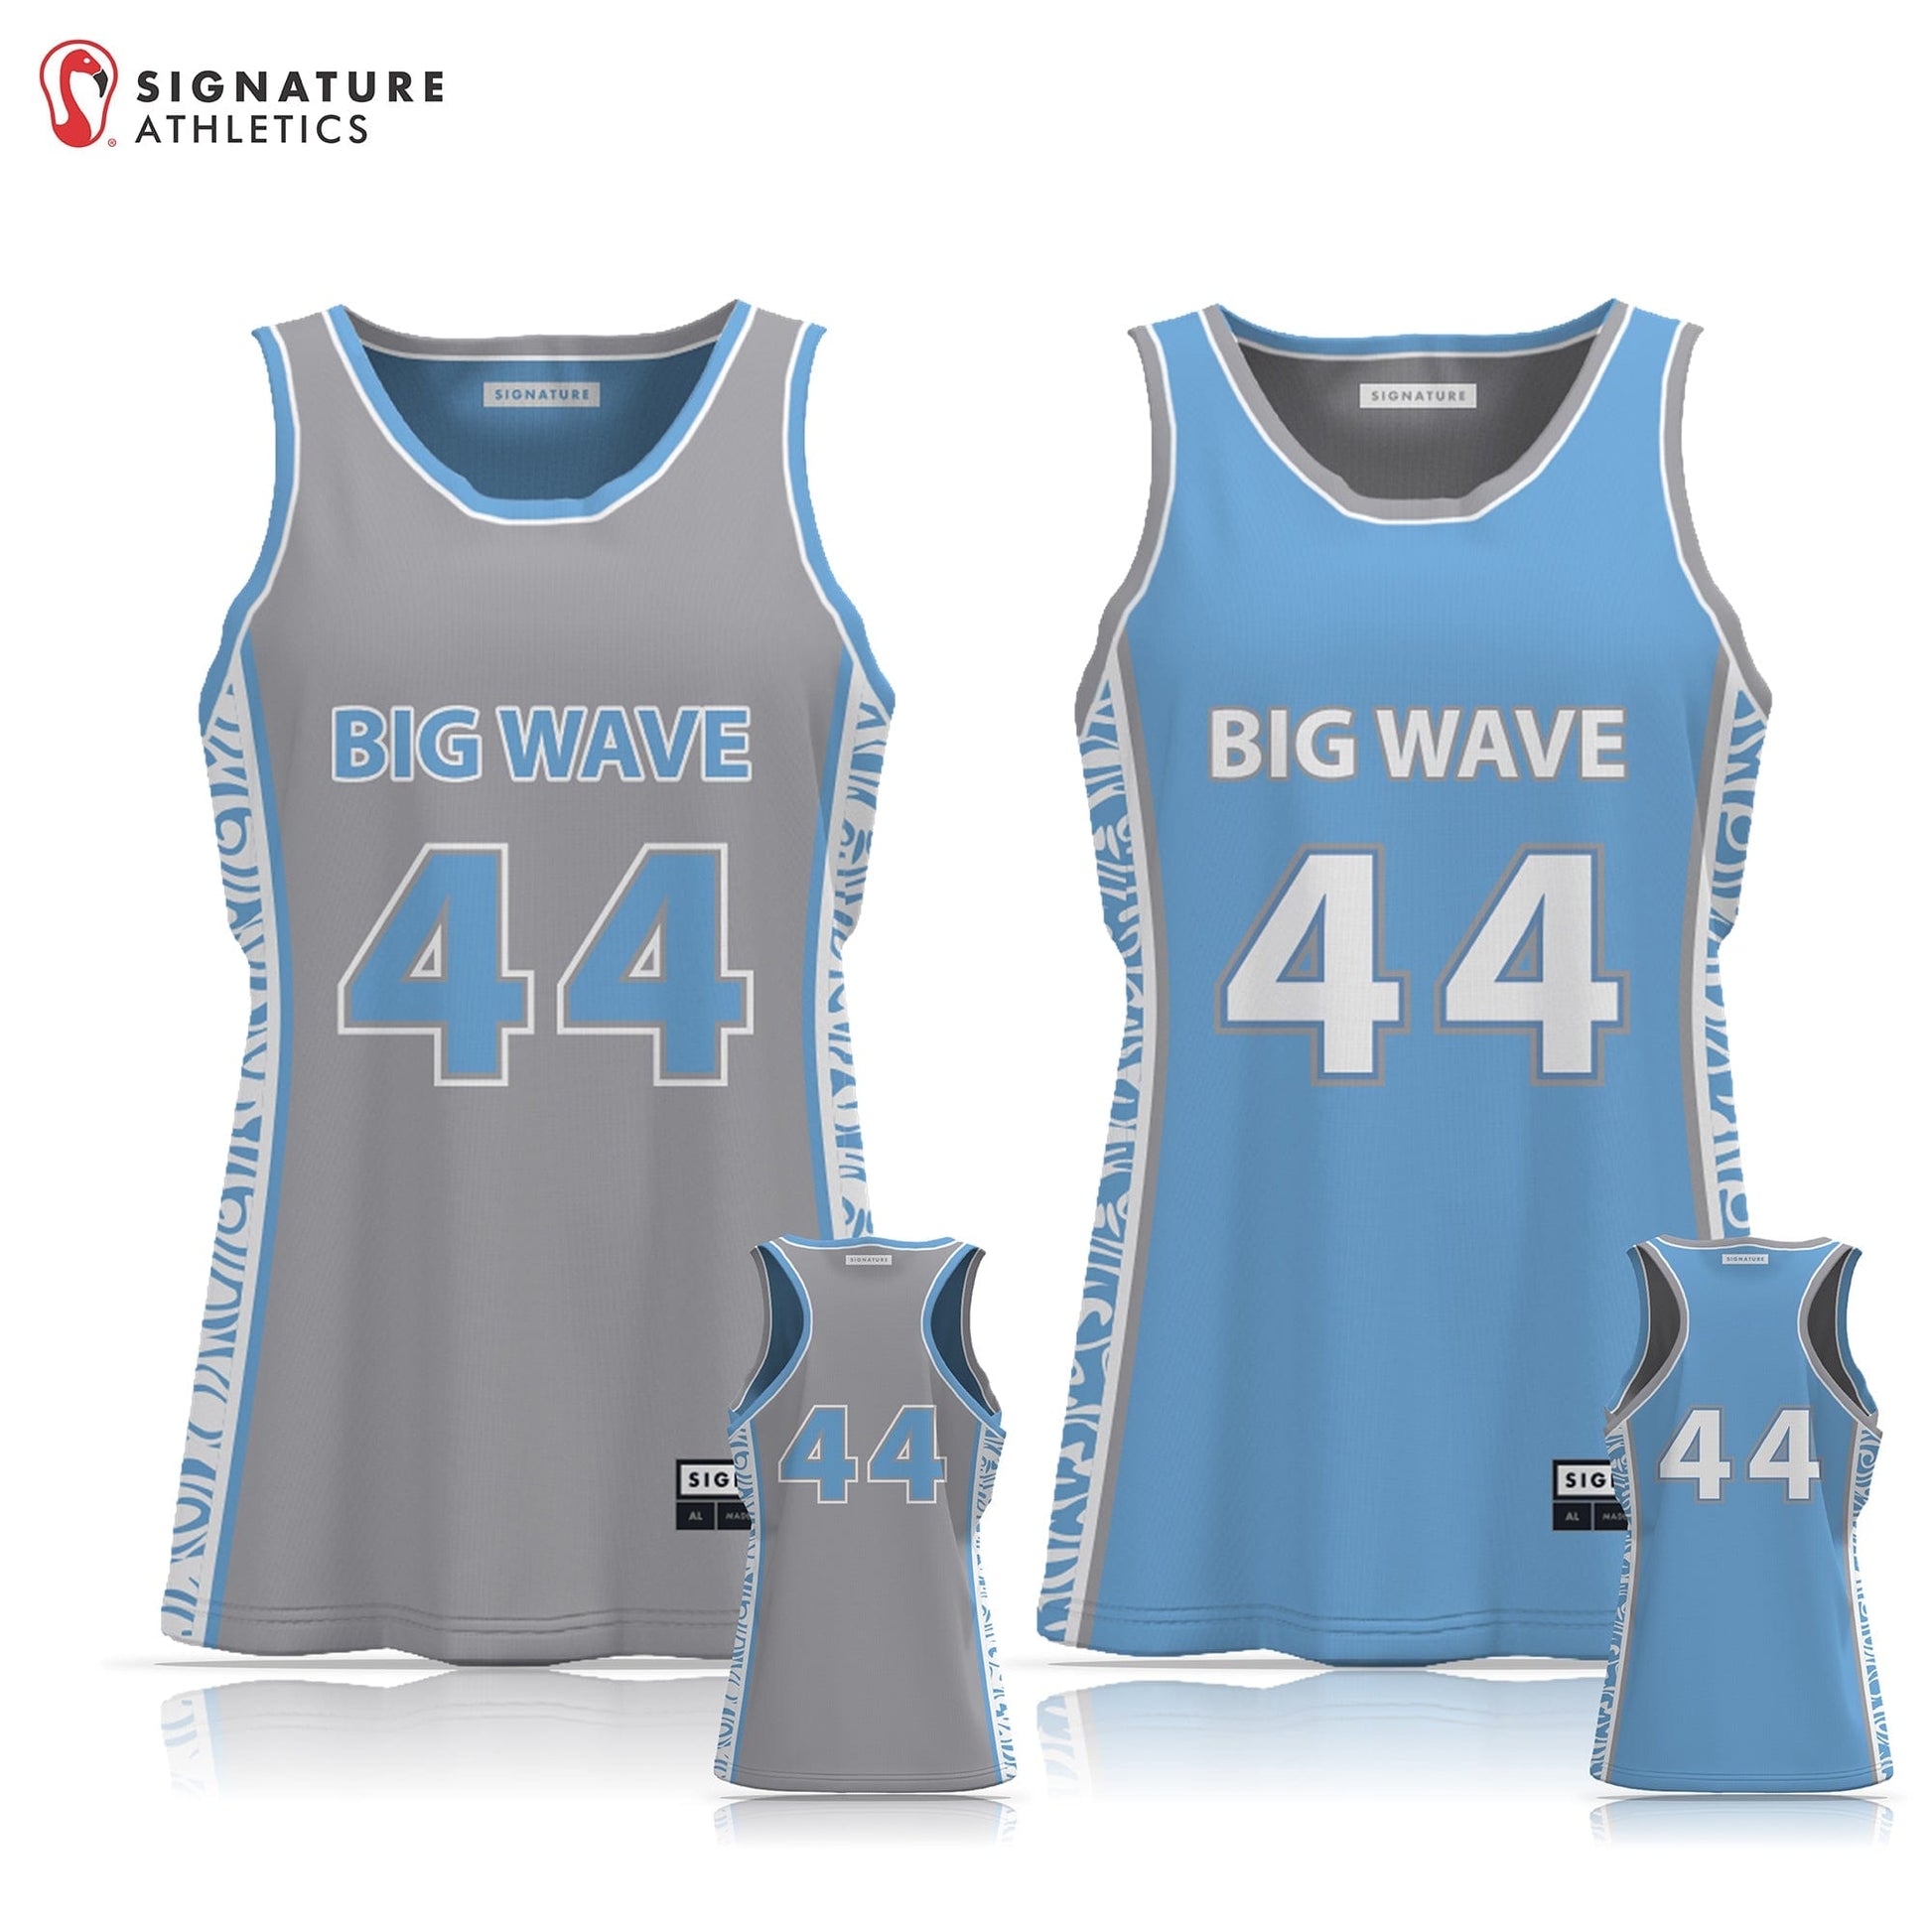 Big Wave Lacrosse Women's 3 Piece Player Game Package Signature Lacrosse